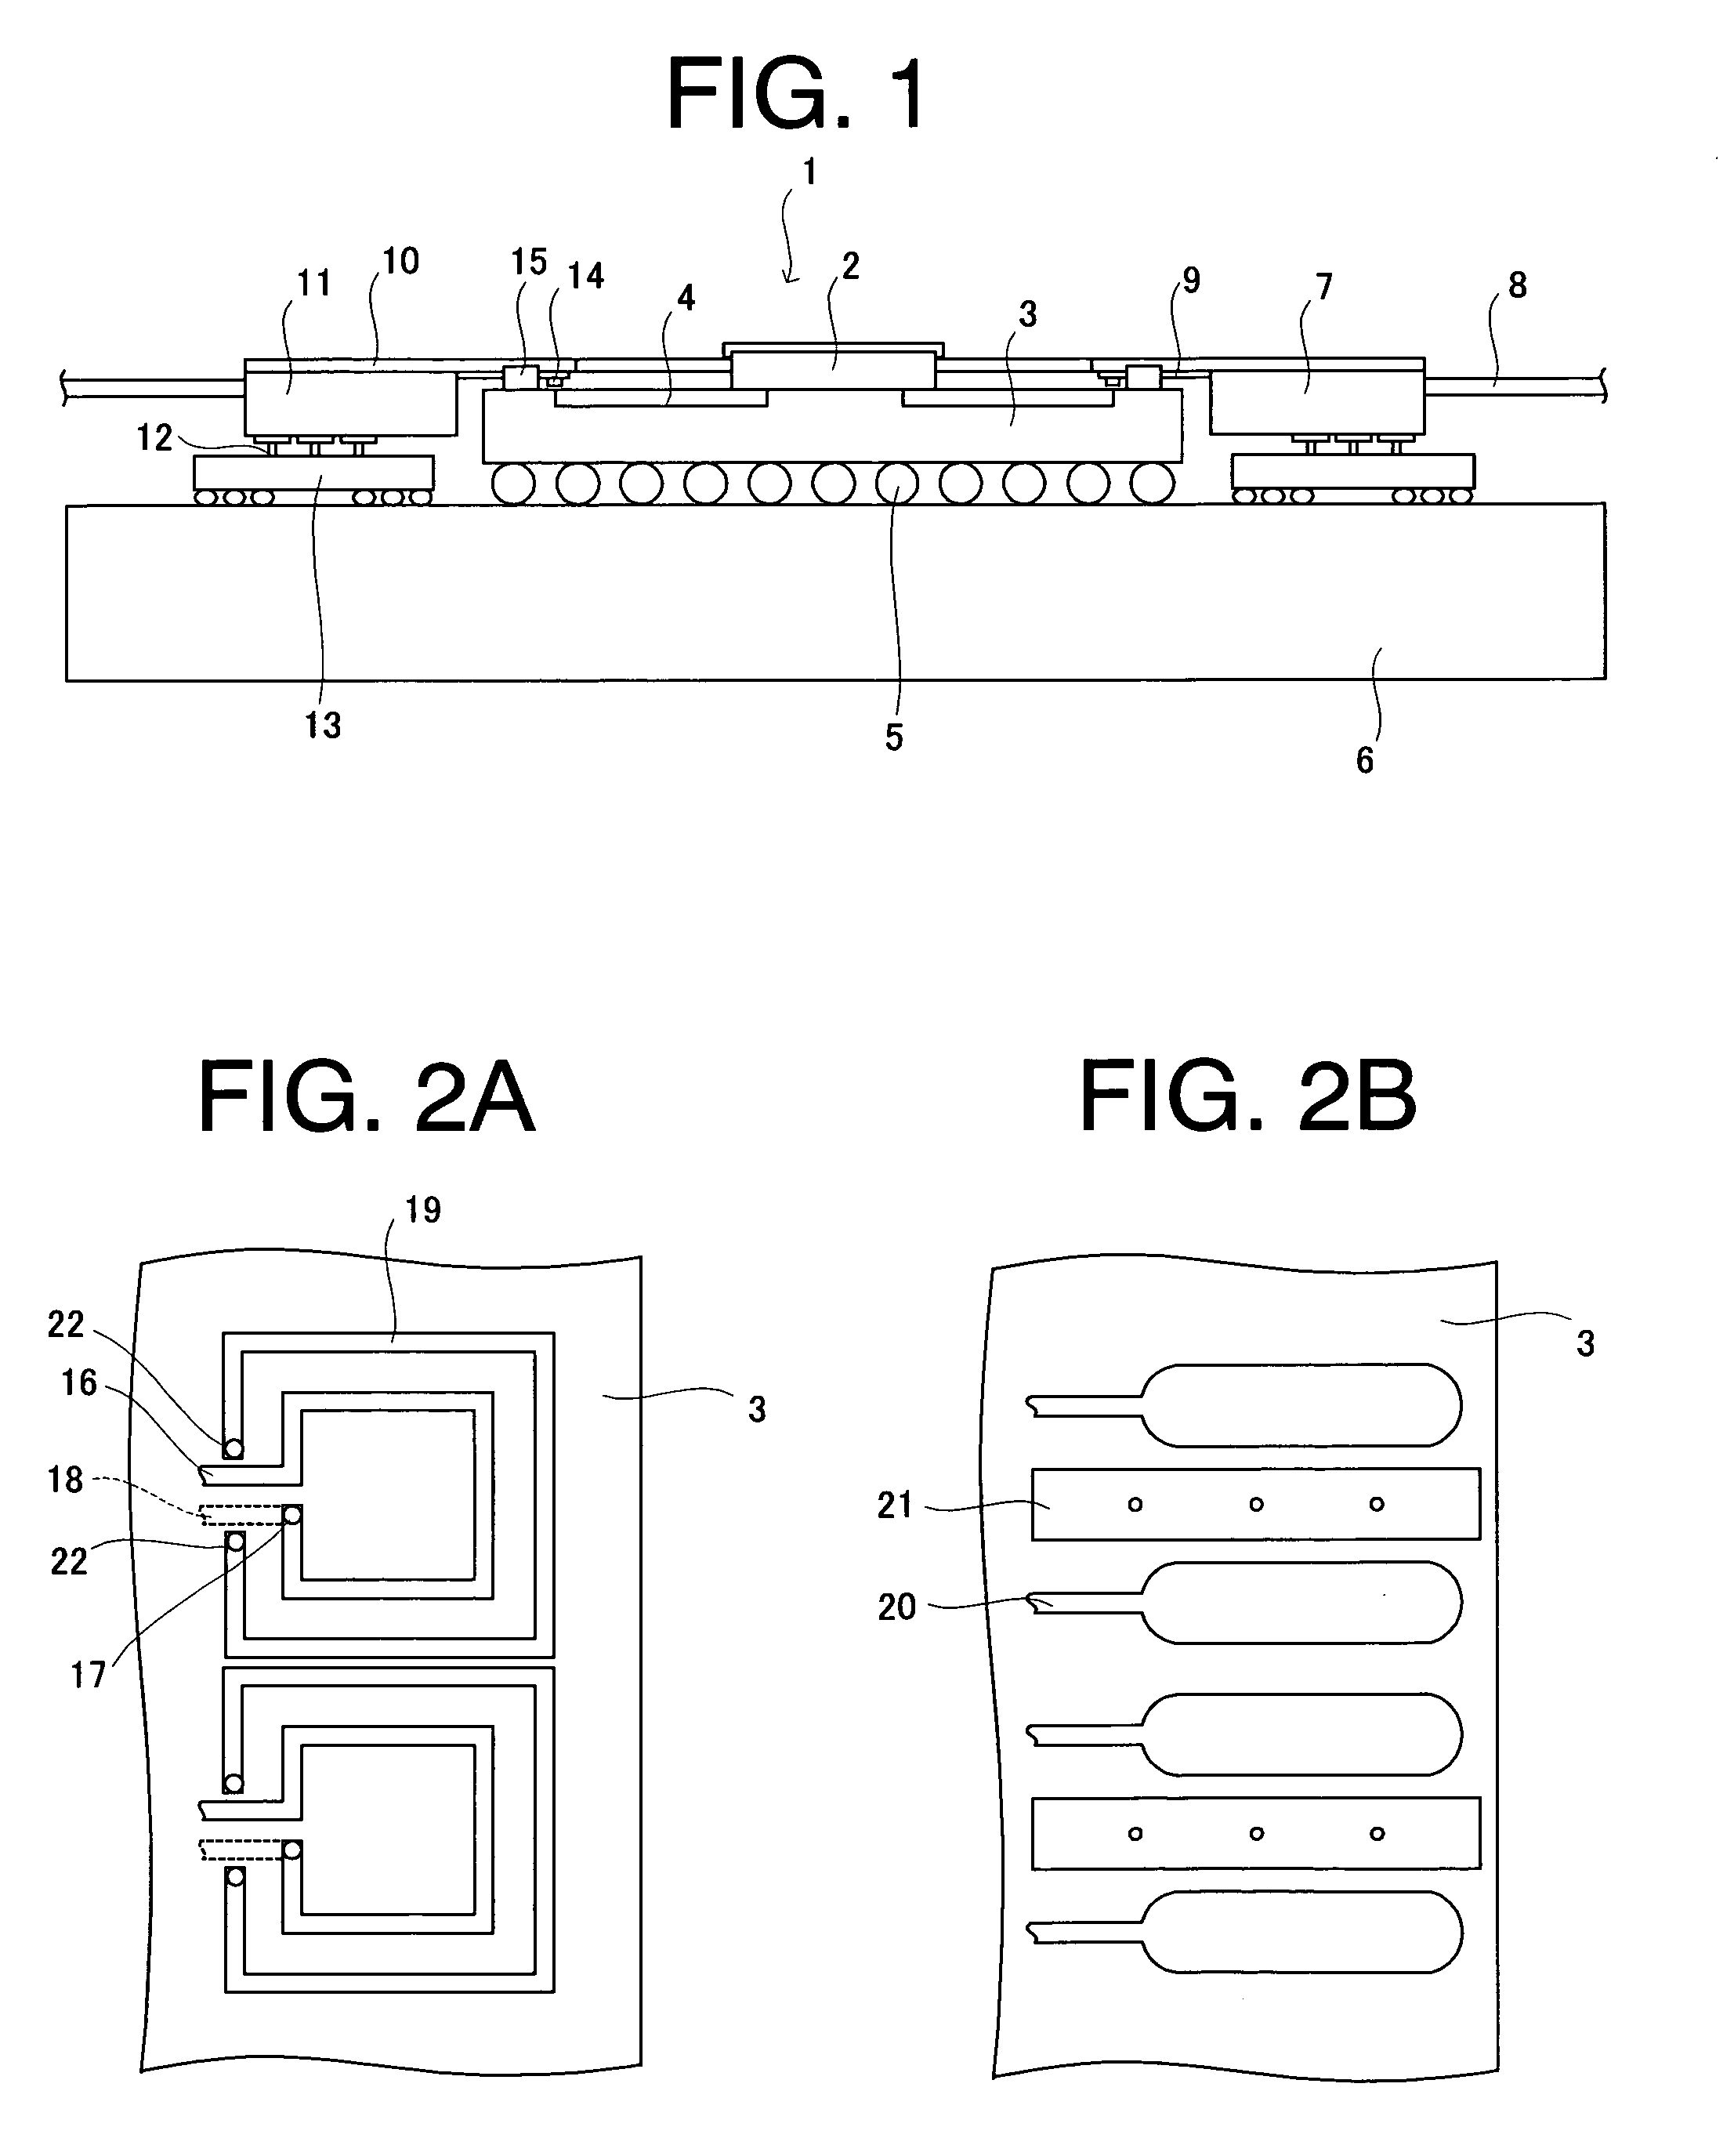 LSI package with interface module, transmission line package, and ribbon optical transmission line